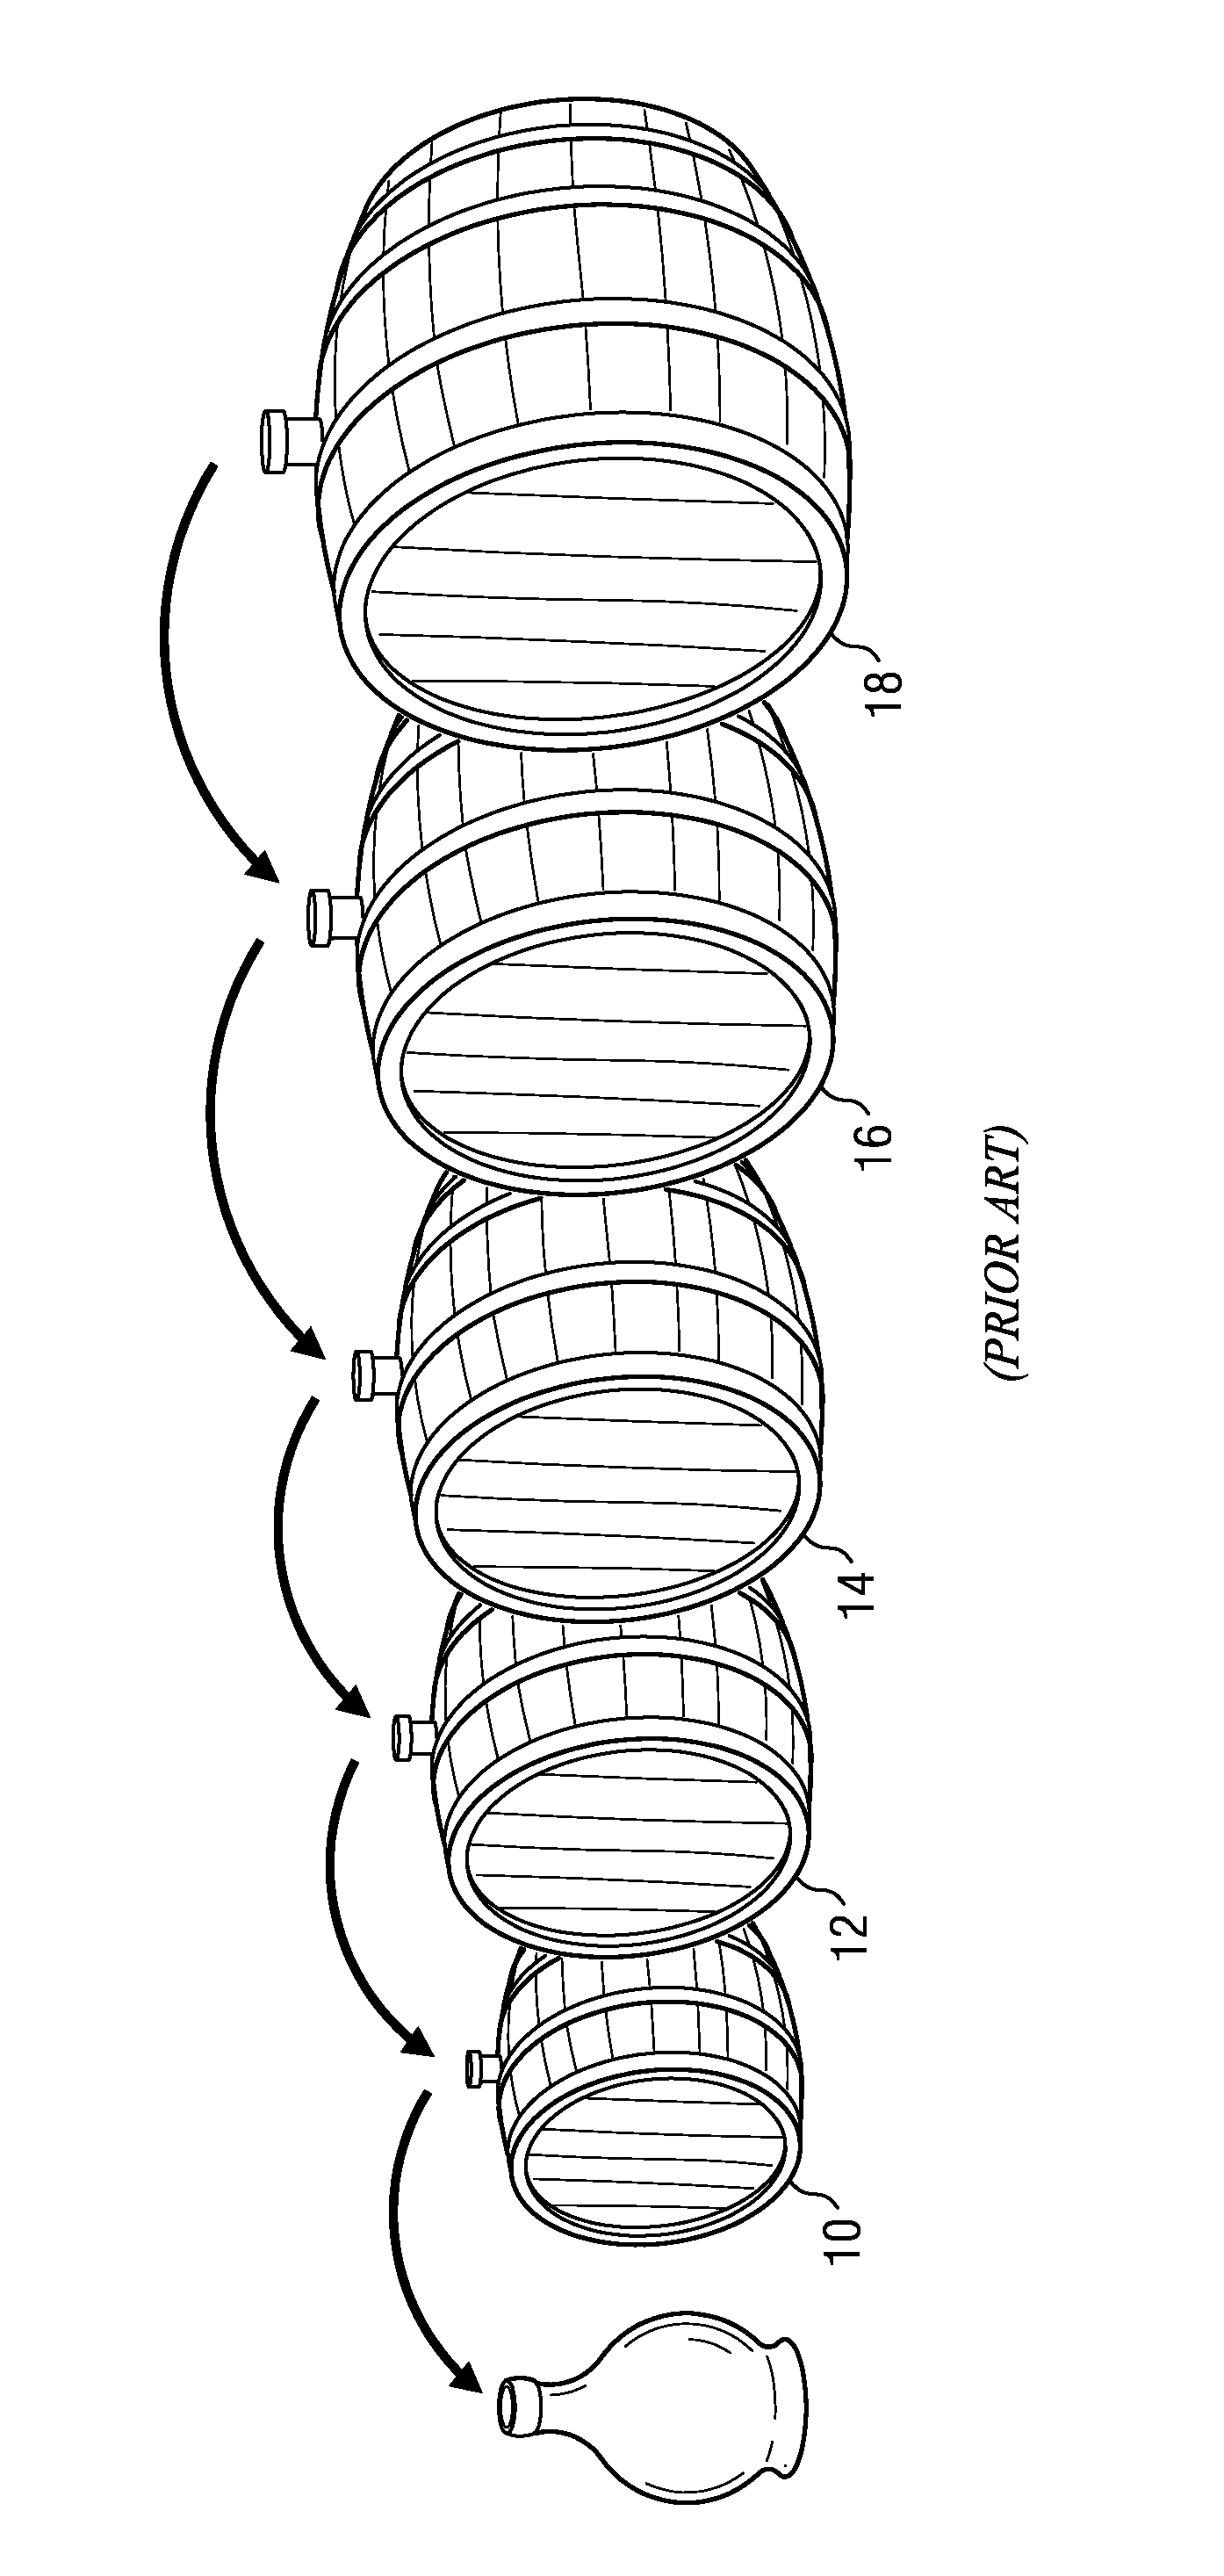 Flavouring compositions and methods for making same